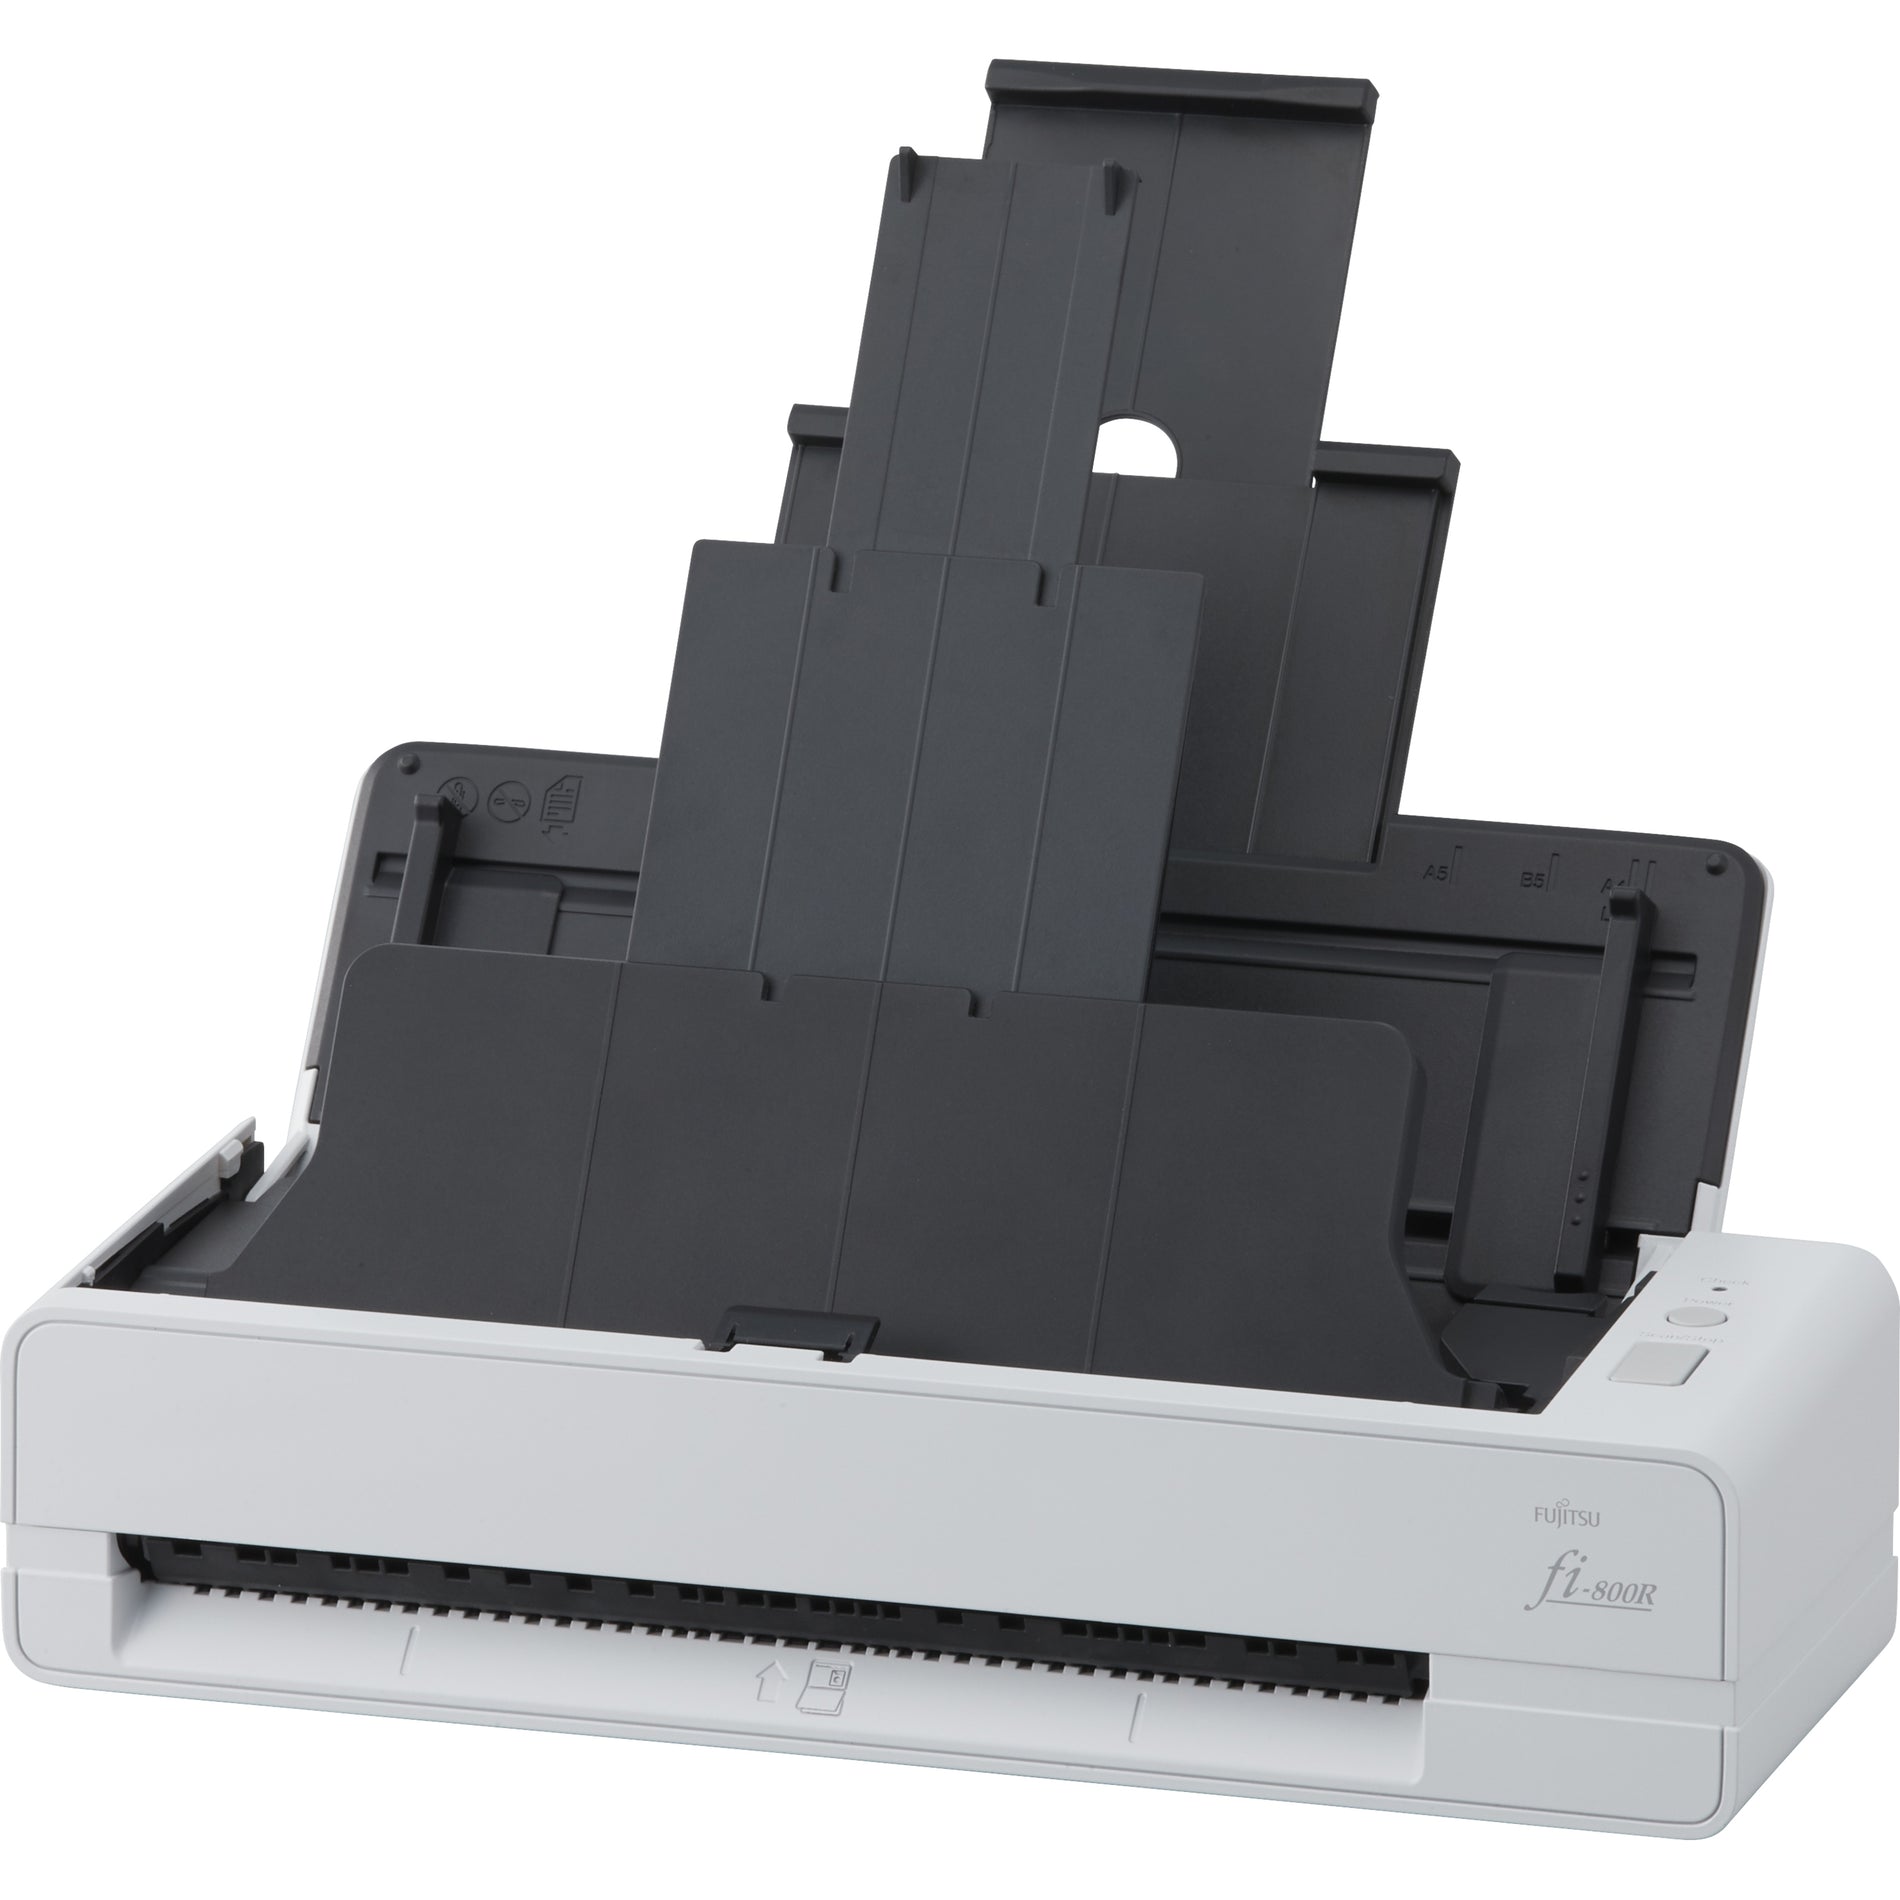 Fujitsu PA03795-B005 Image Scanner fi-800R, Sheetfed Scanner, A6-A8 Media Size, Color/Grayscale/Monochrome Scanning, 40 Sheet ADF Capacity